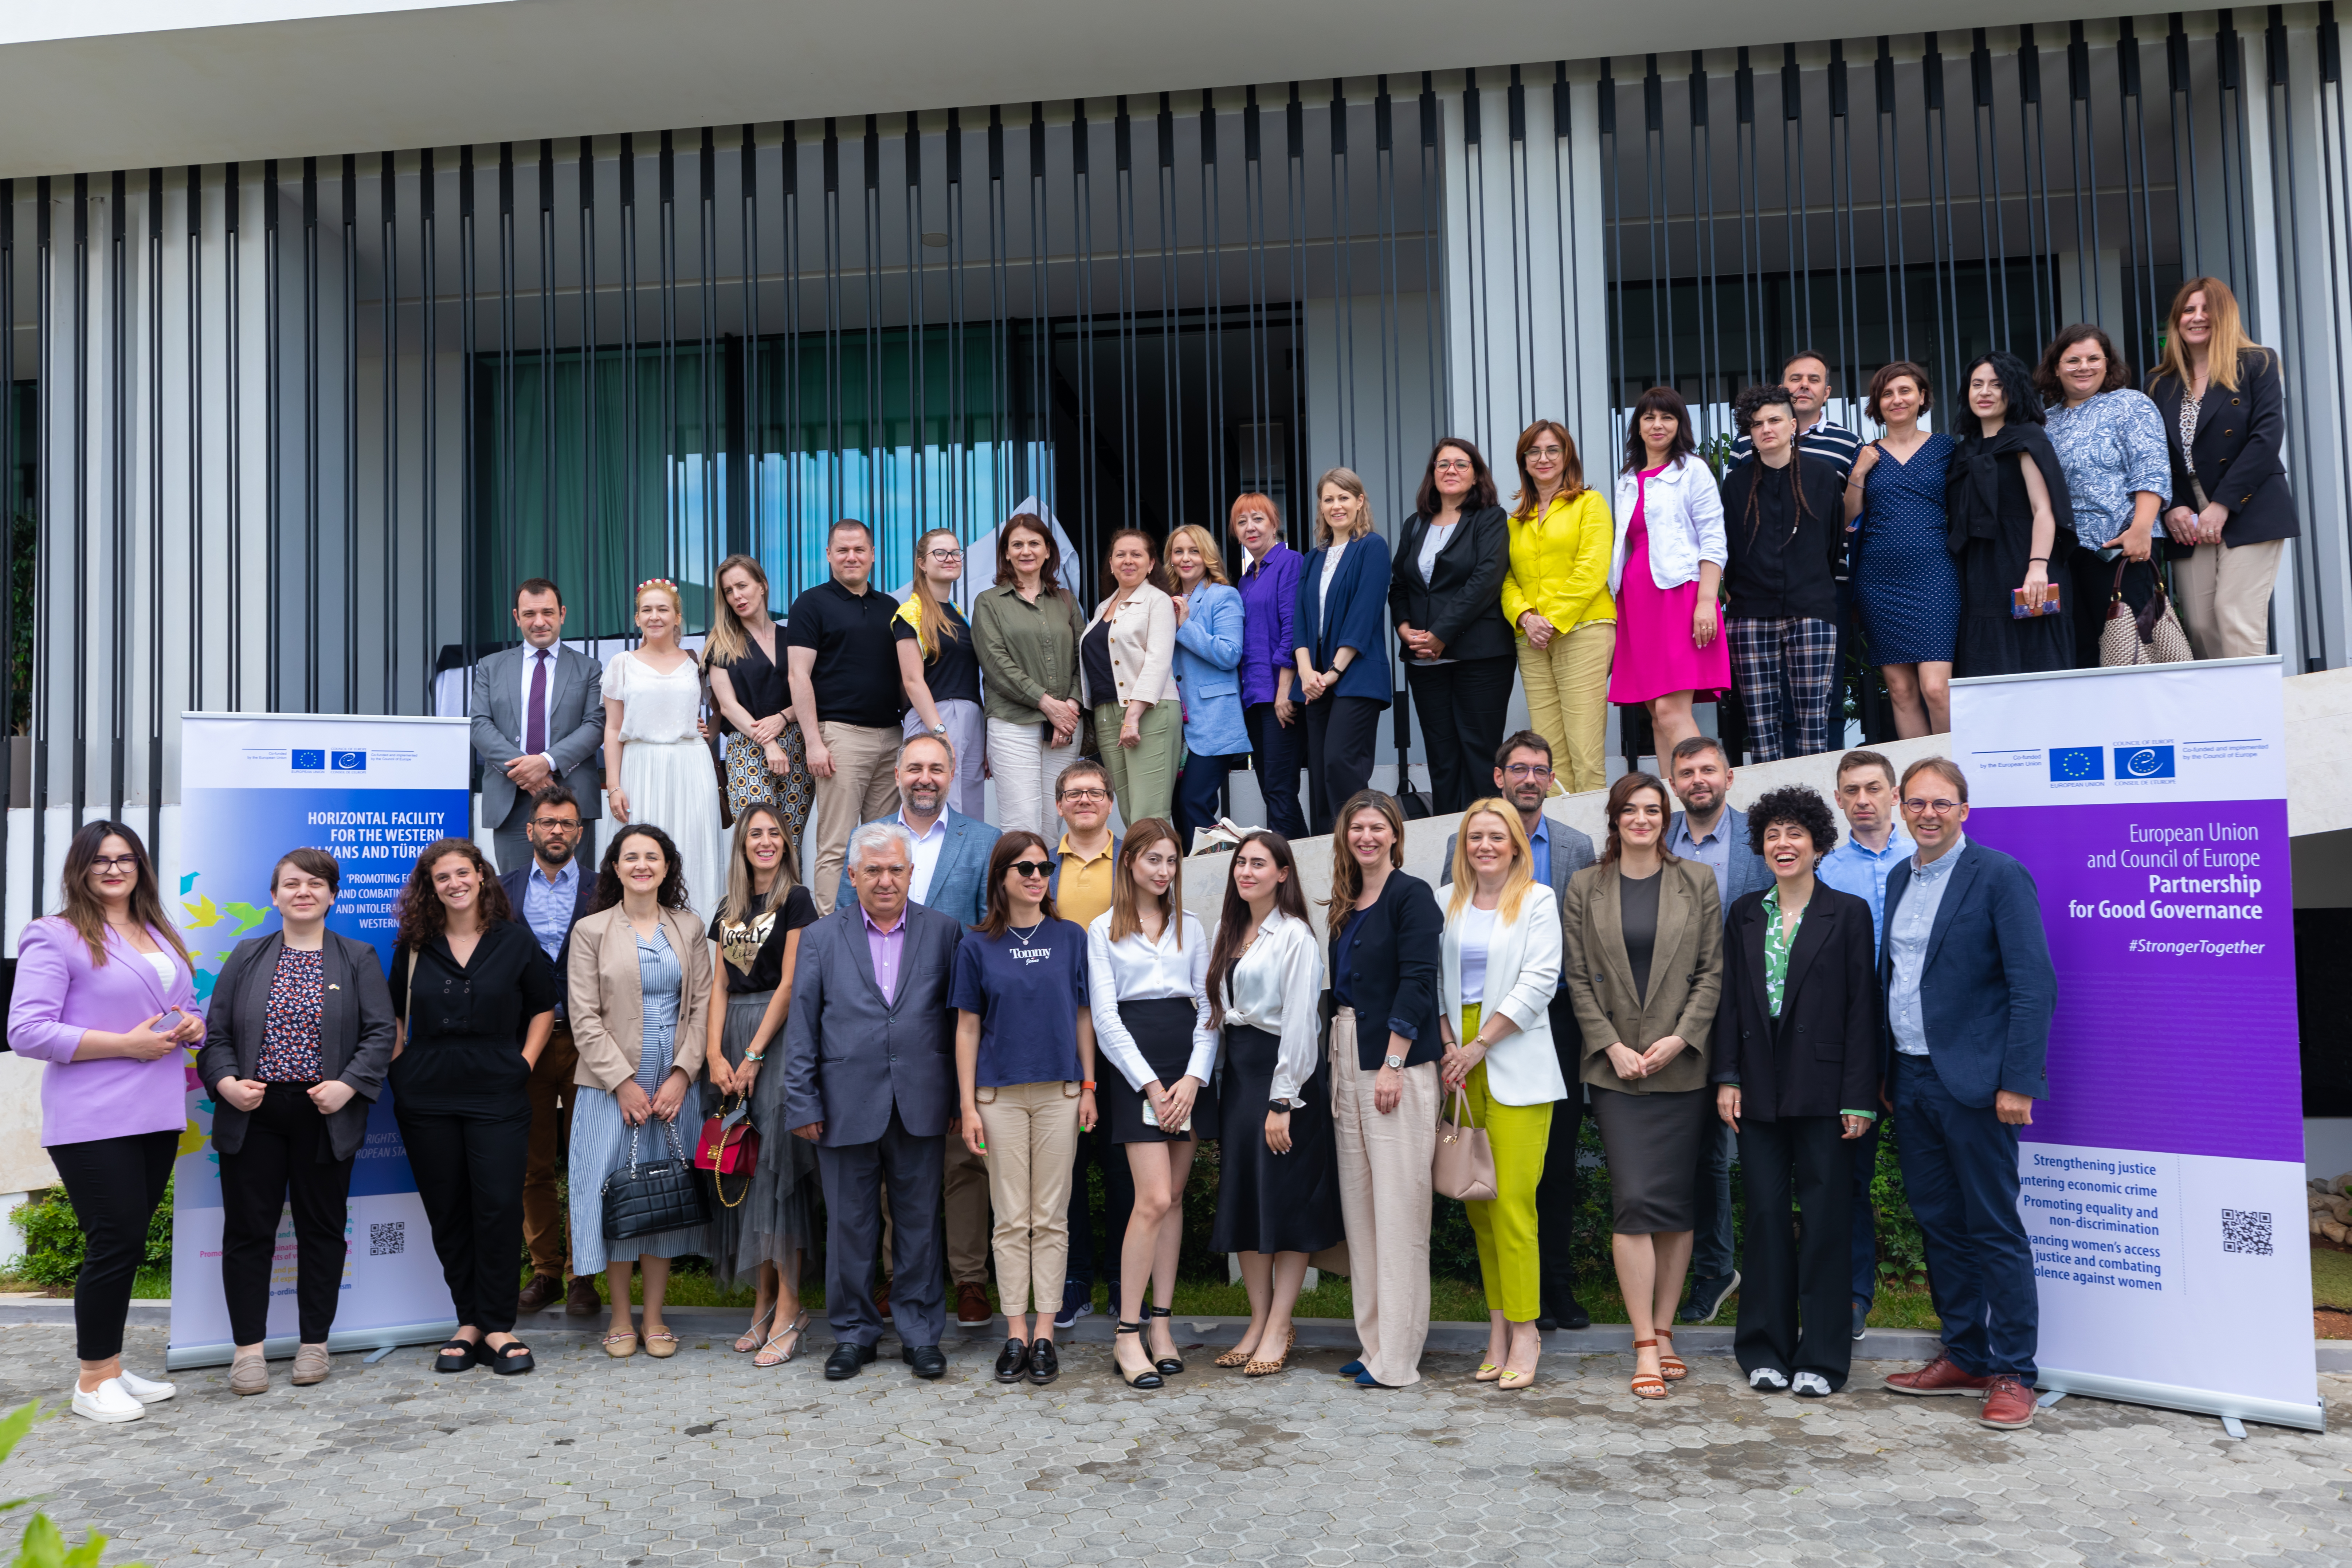 Collaborative efforts to better tackle racism in the Western Balkans and Eastern Partnership regions: key stakeholders meet in Albania to discuss EU and Council of Europe support